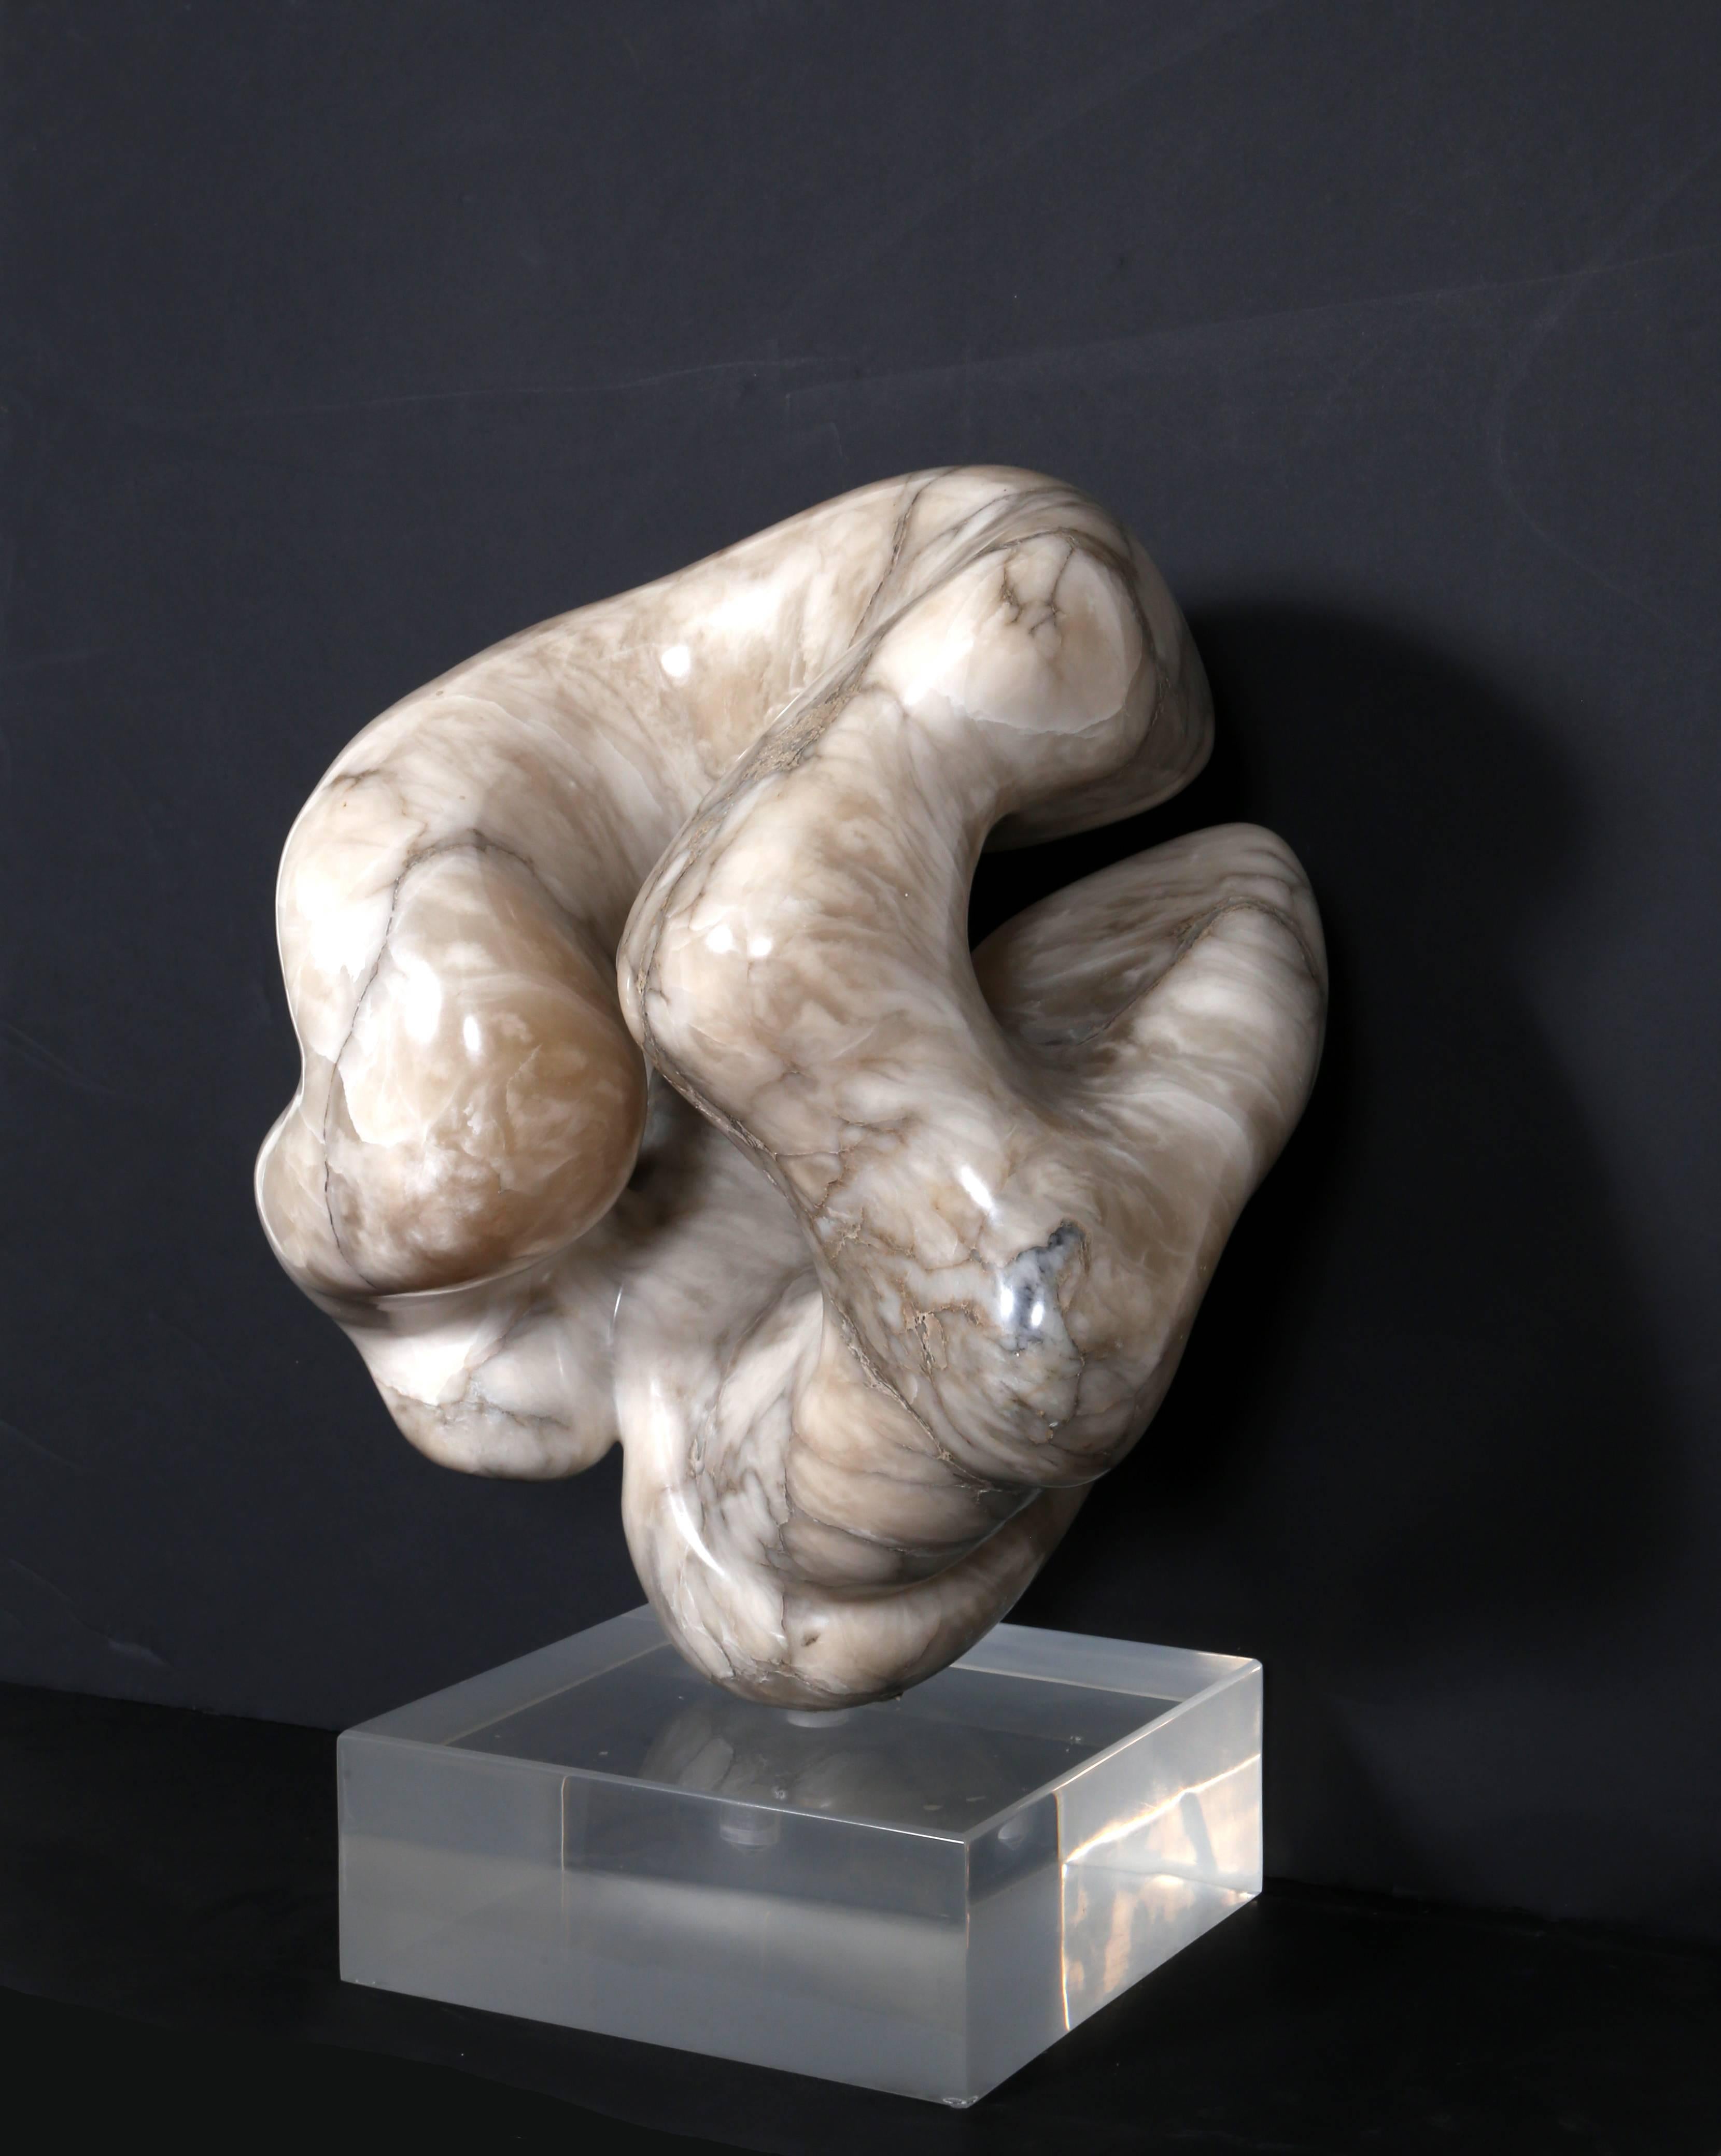 Artist:	Bruno Facchini
Title: untitled 
Year: 1978
Medium:	Marble Sculpture, signature and date inscribed
Size: 20 x 14 x 16 in. (50.8 x 35.56 x 40.64 cm)
Base: 4 x 11 x 11 inches

